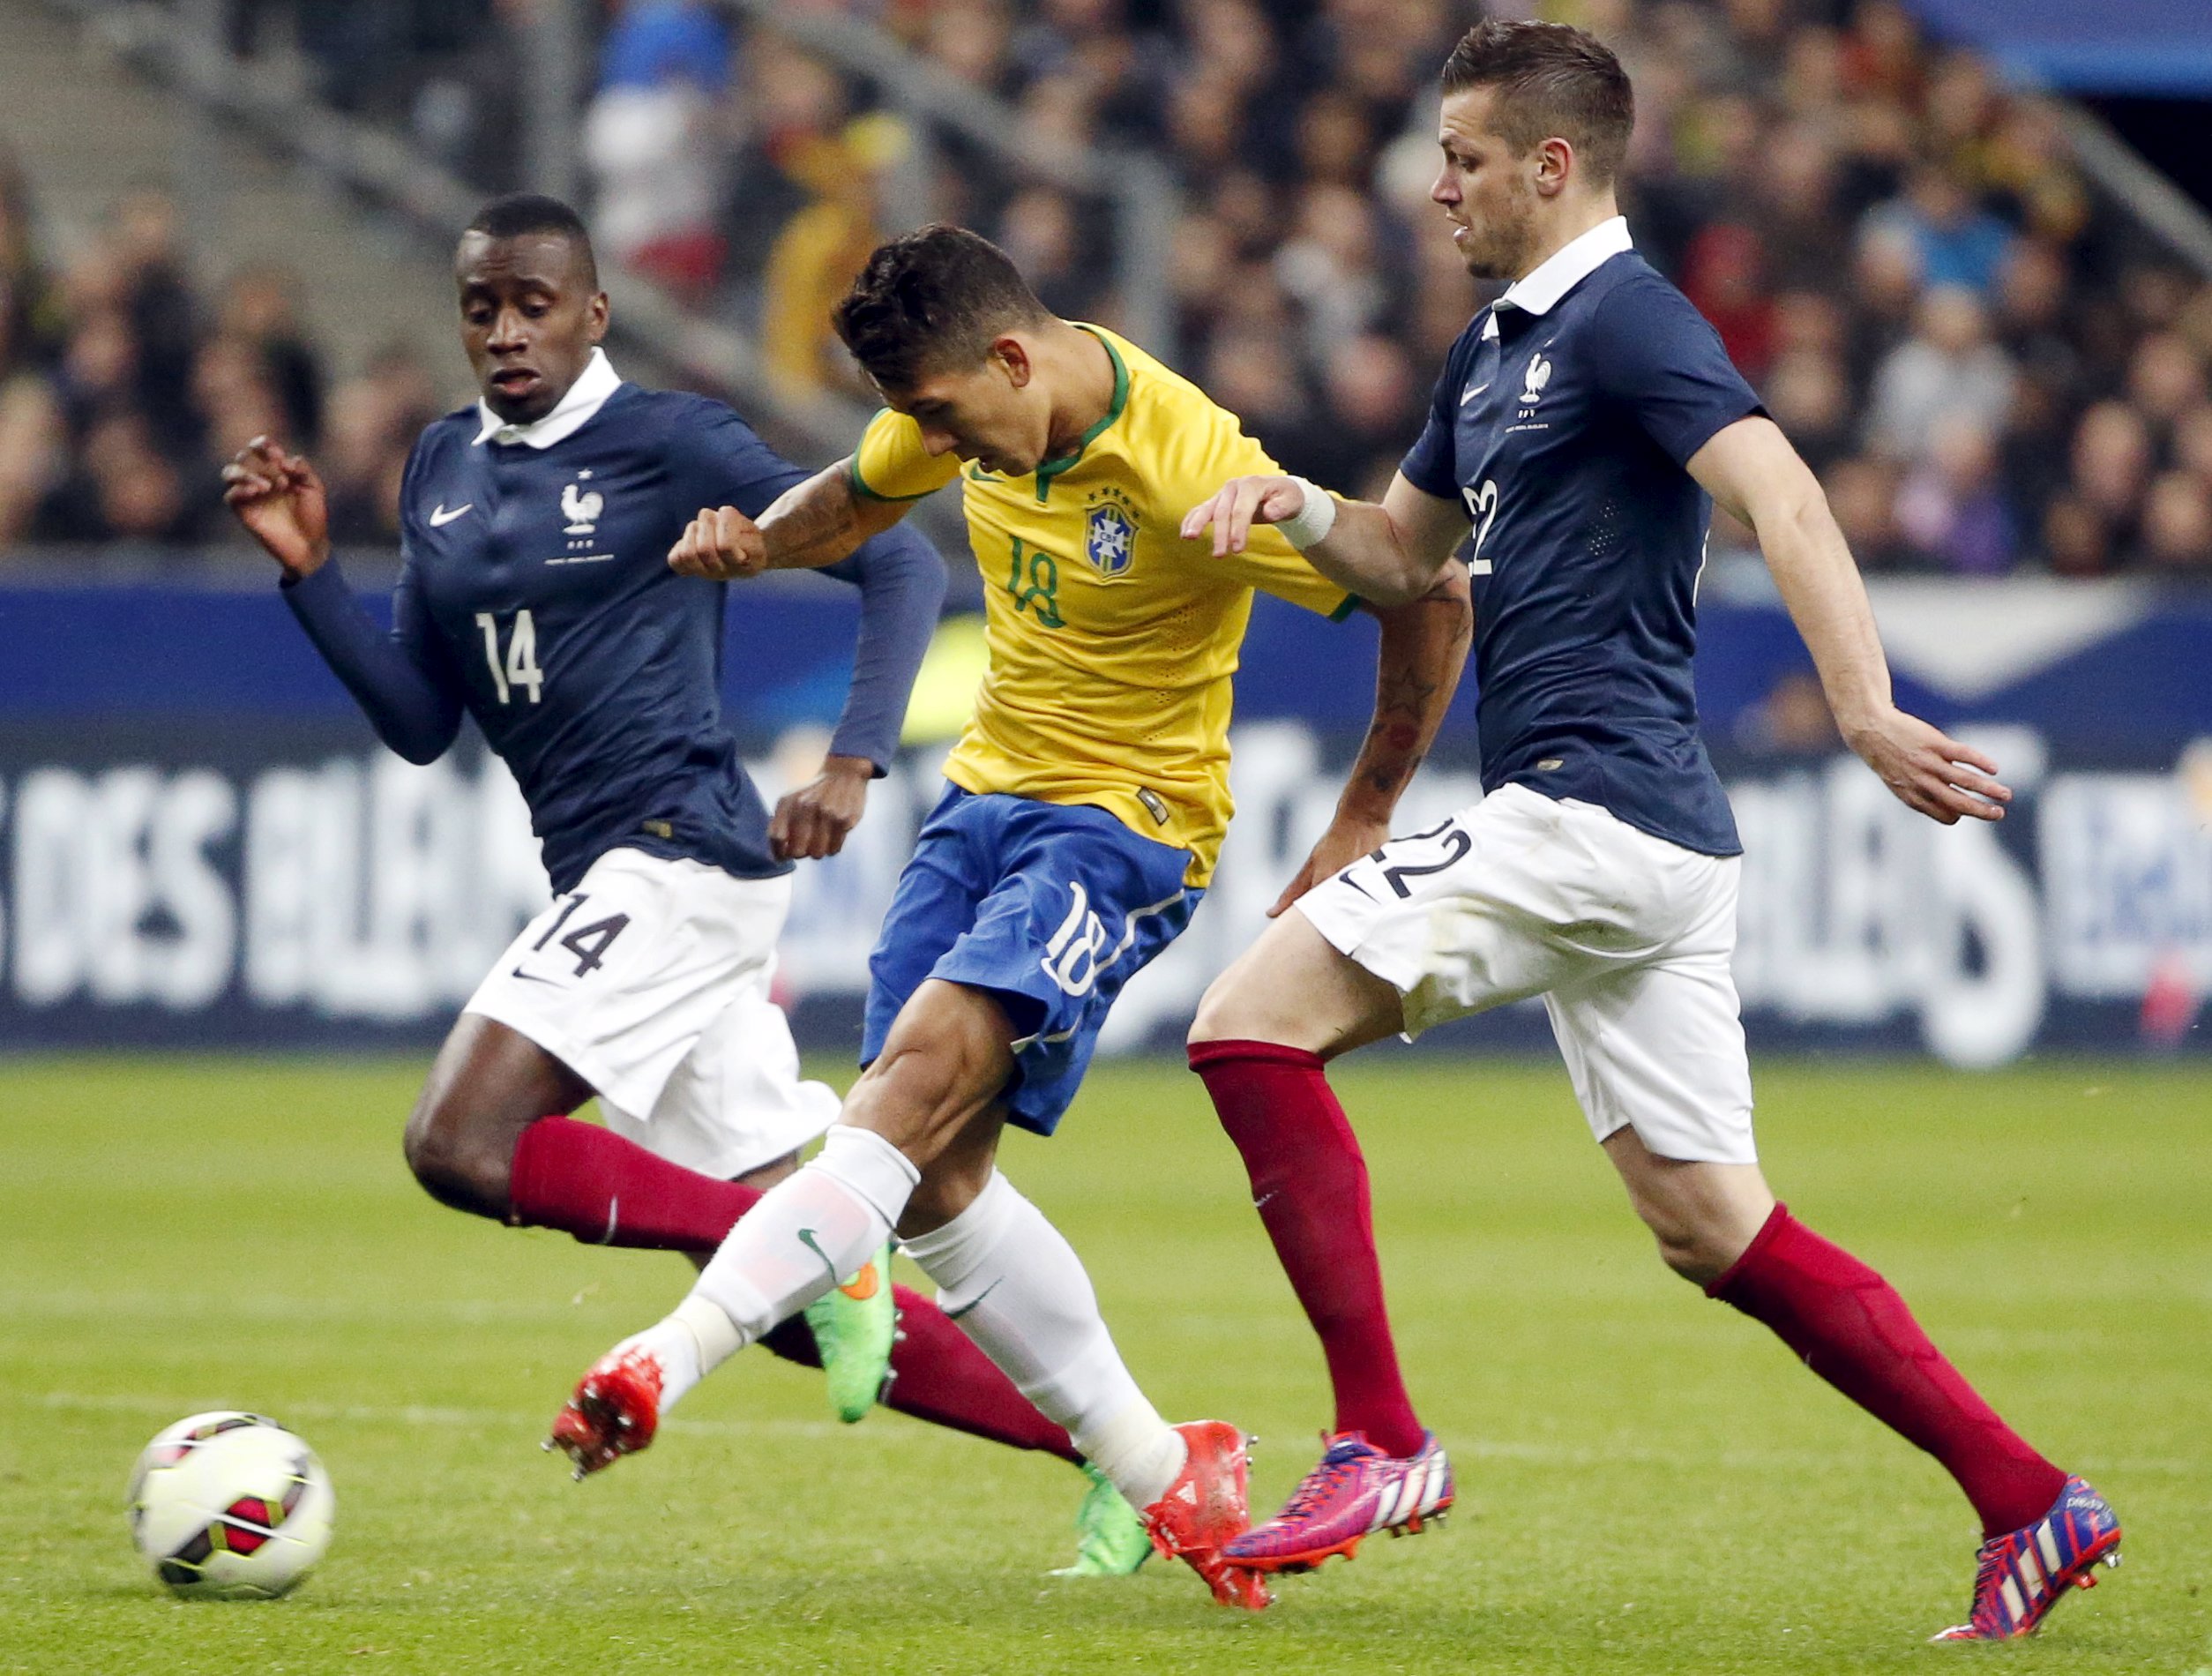 Brazil finding right balance in France win, says Dunga